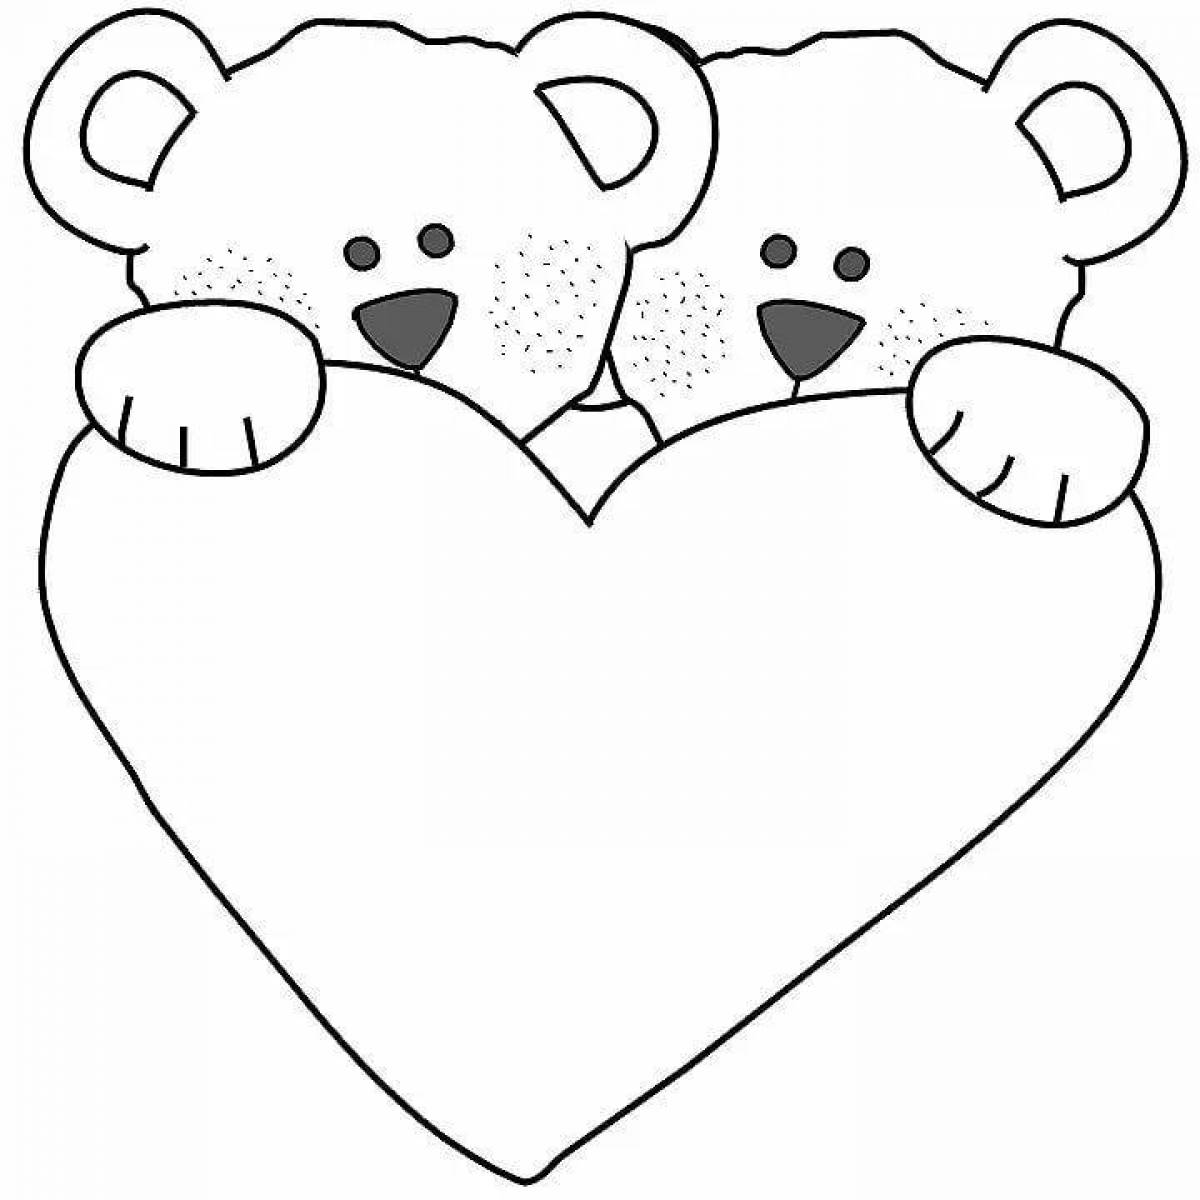 Glorious valentine's coloring page